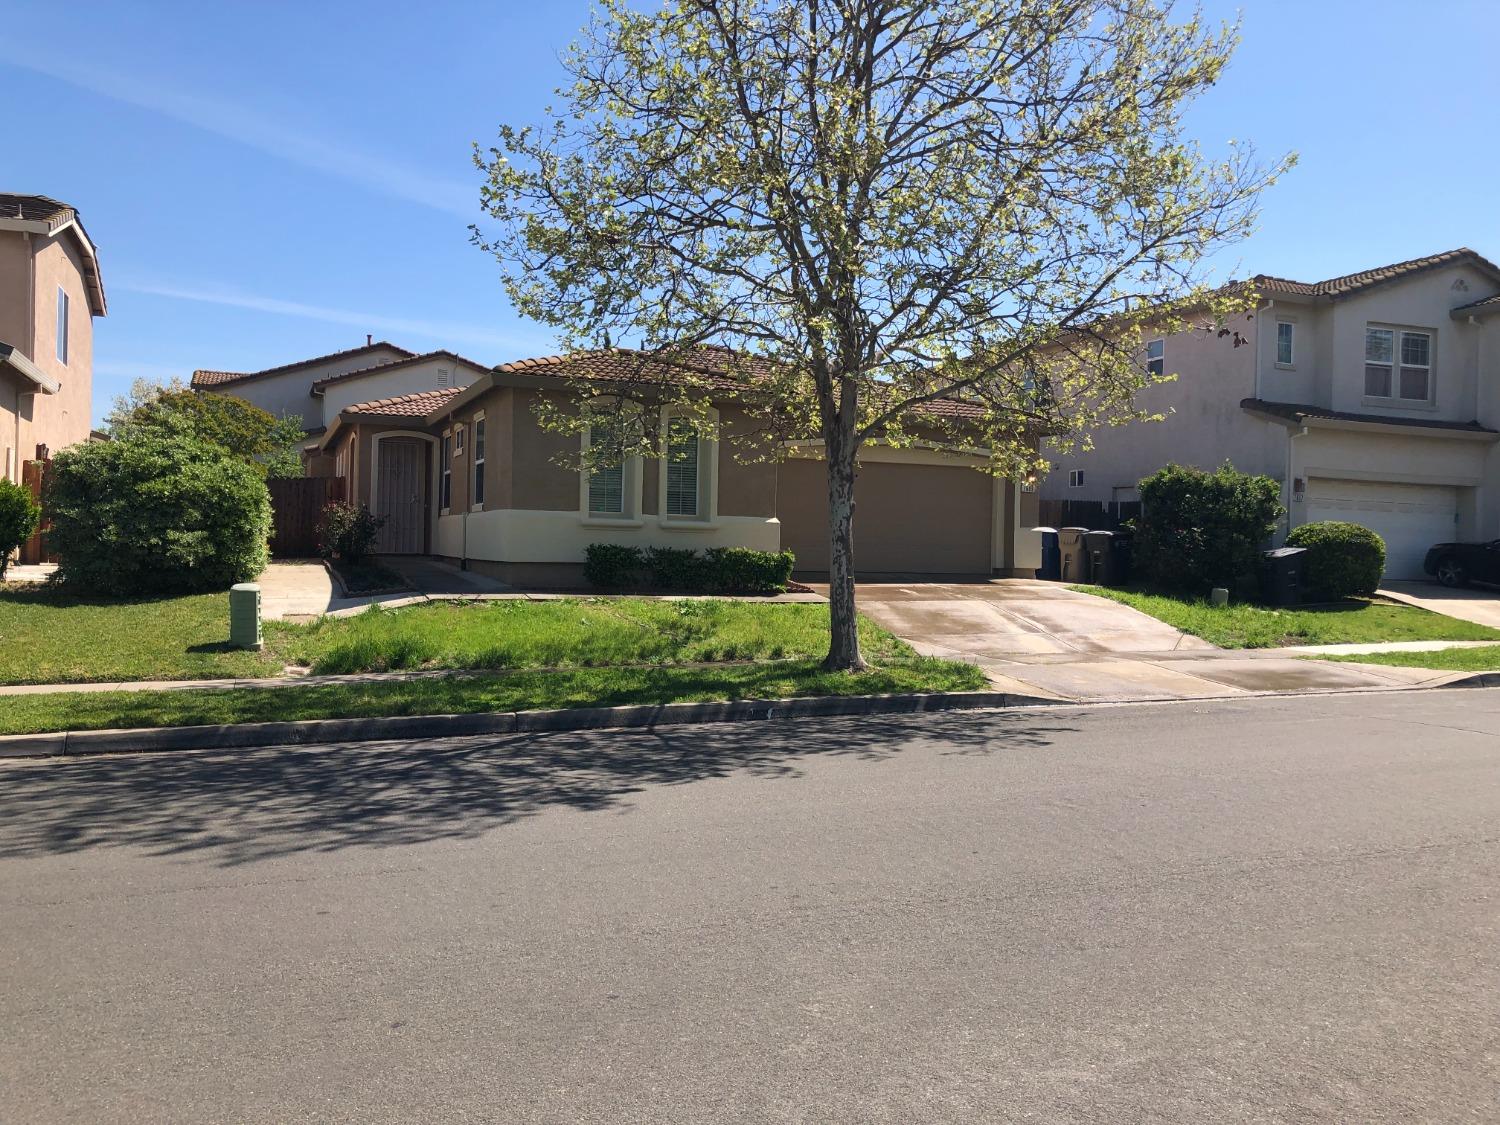 Photo of 7609 Damascas Dr in Elk Grove, CA